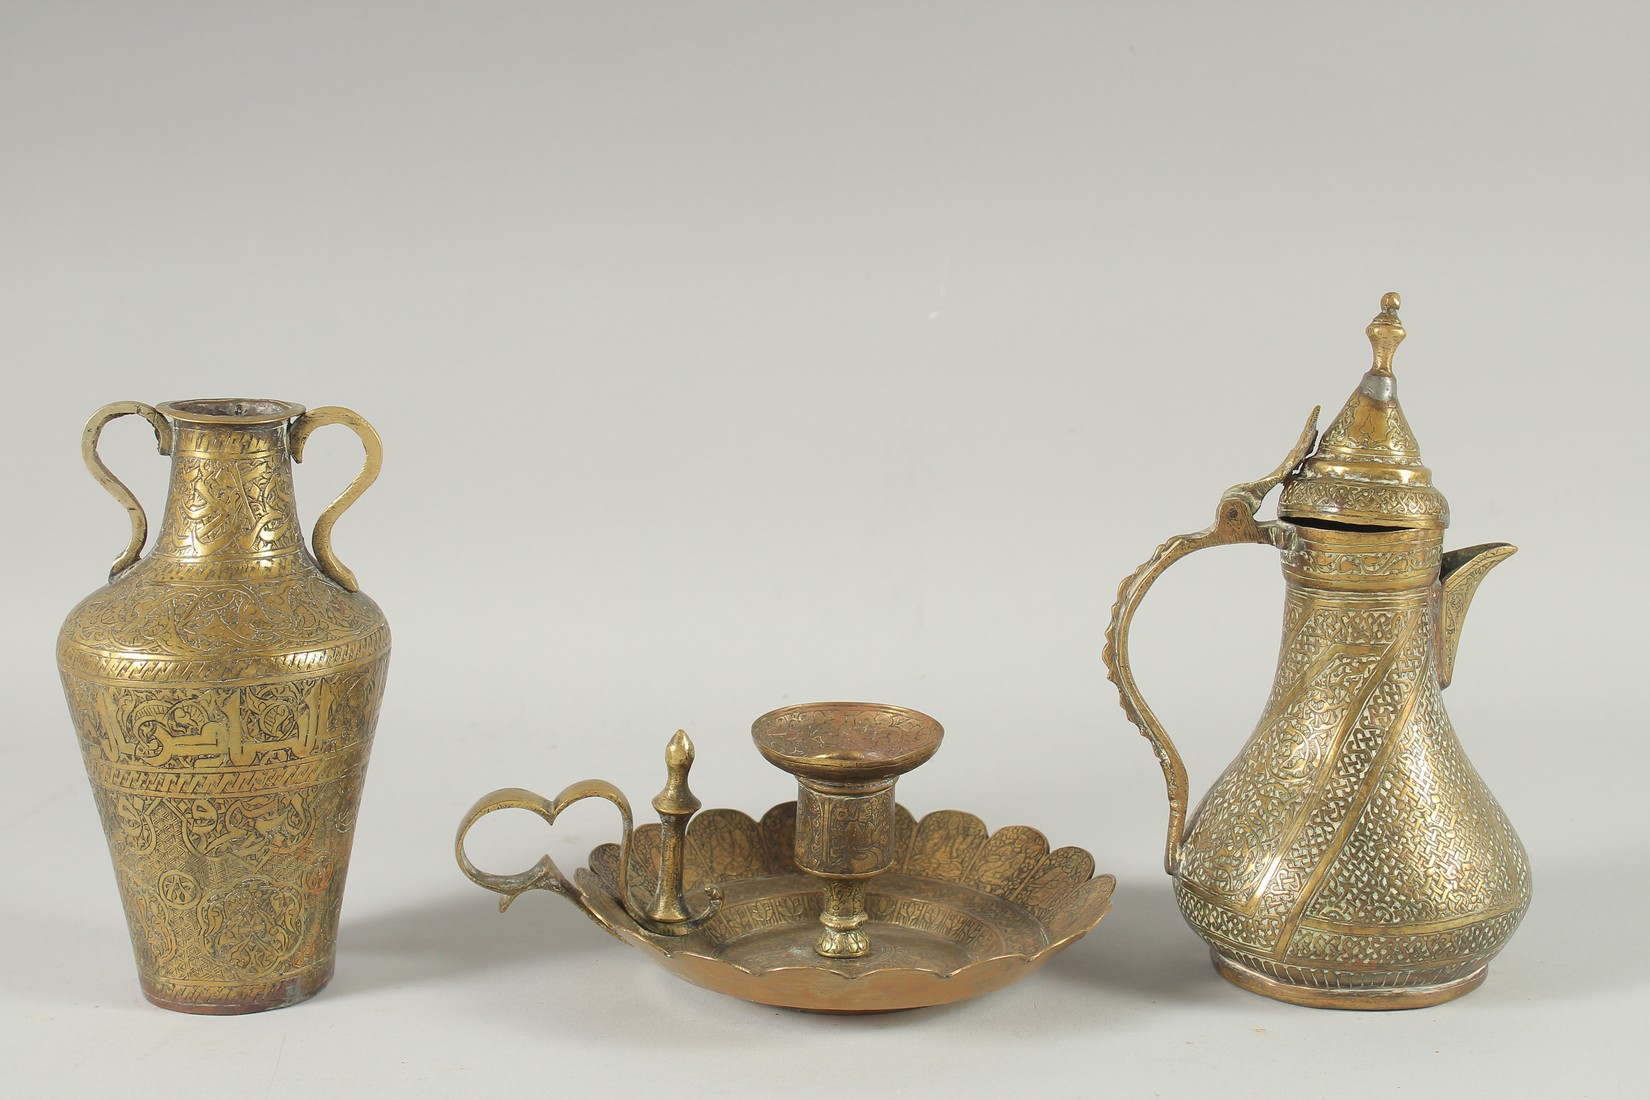 THREE 19TH CENTURY IRANIAN ENGRAVED BRASS PIECES; comprising a twin handle vase / vessel with